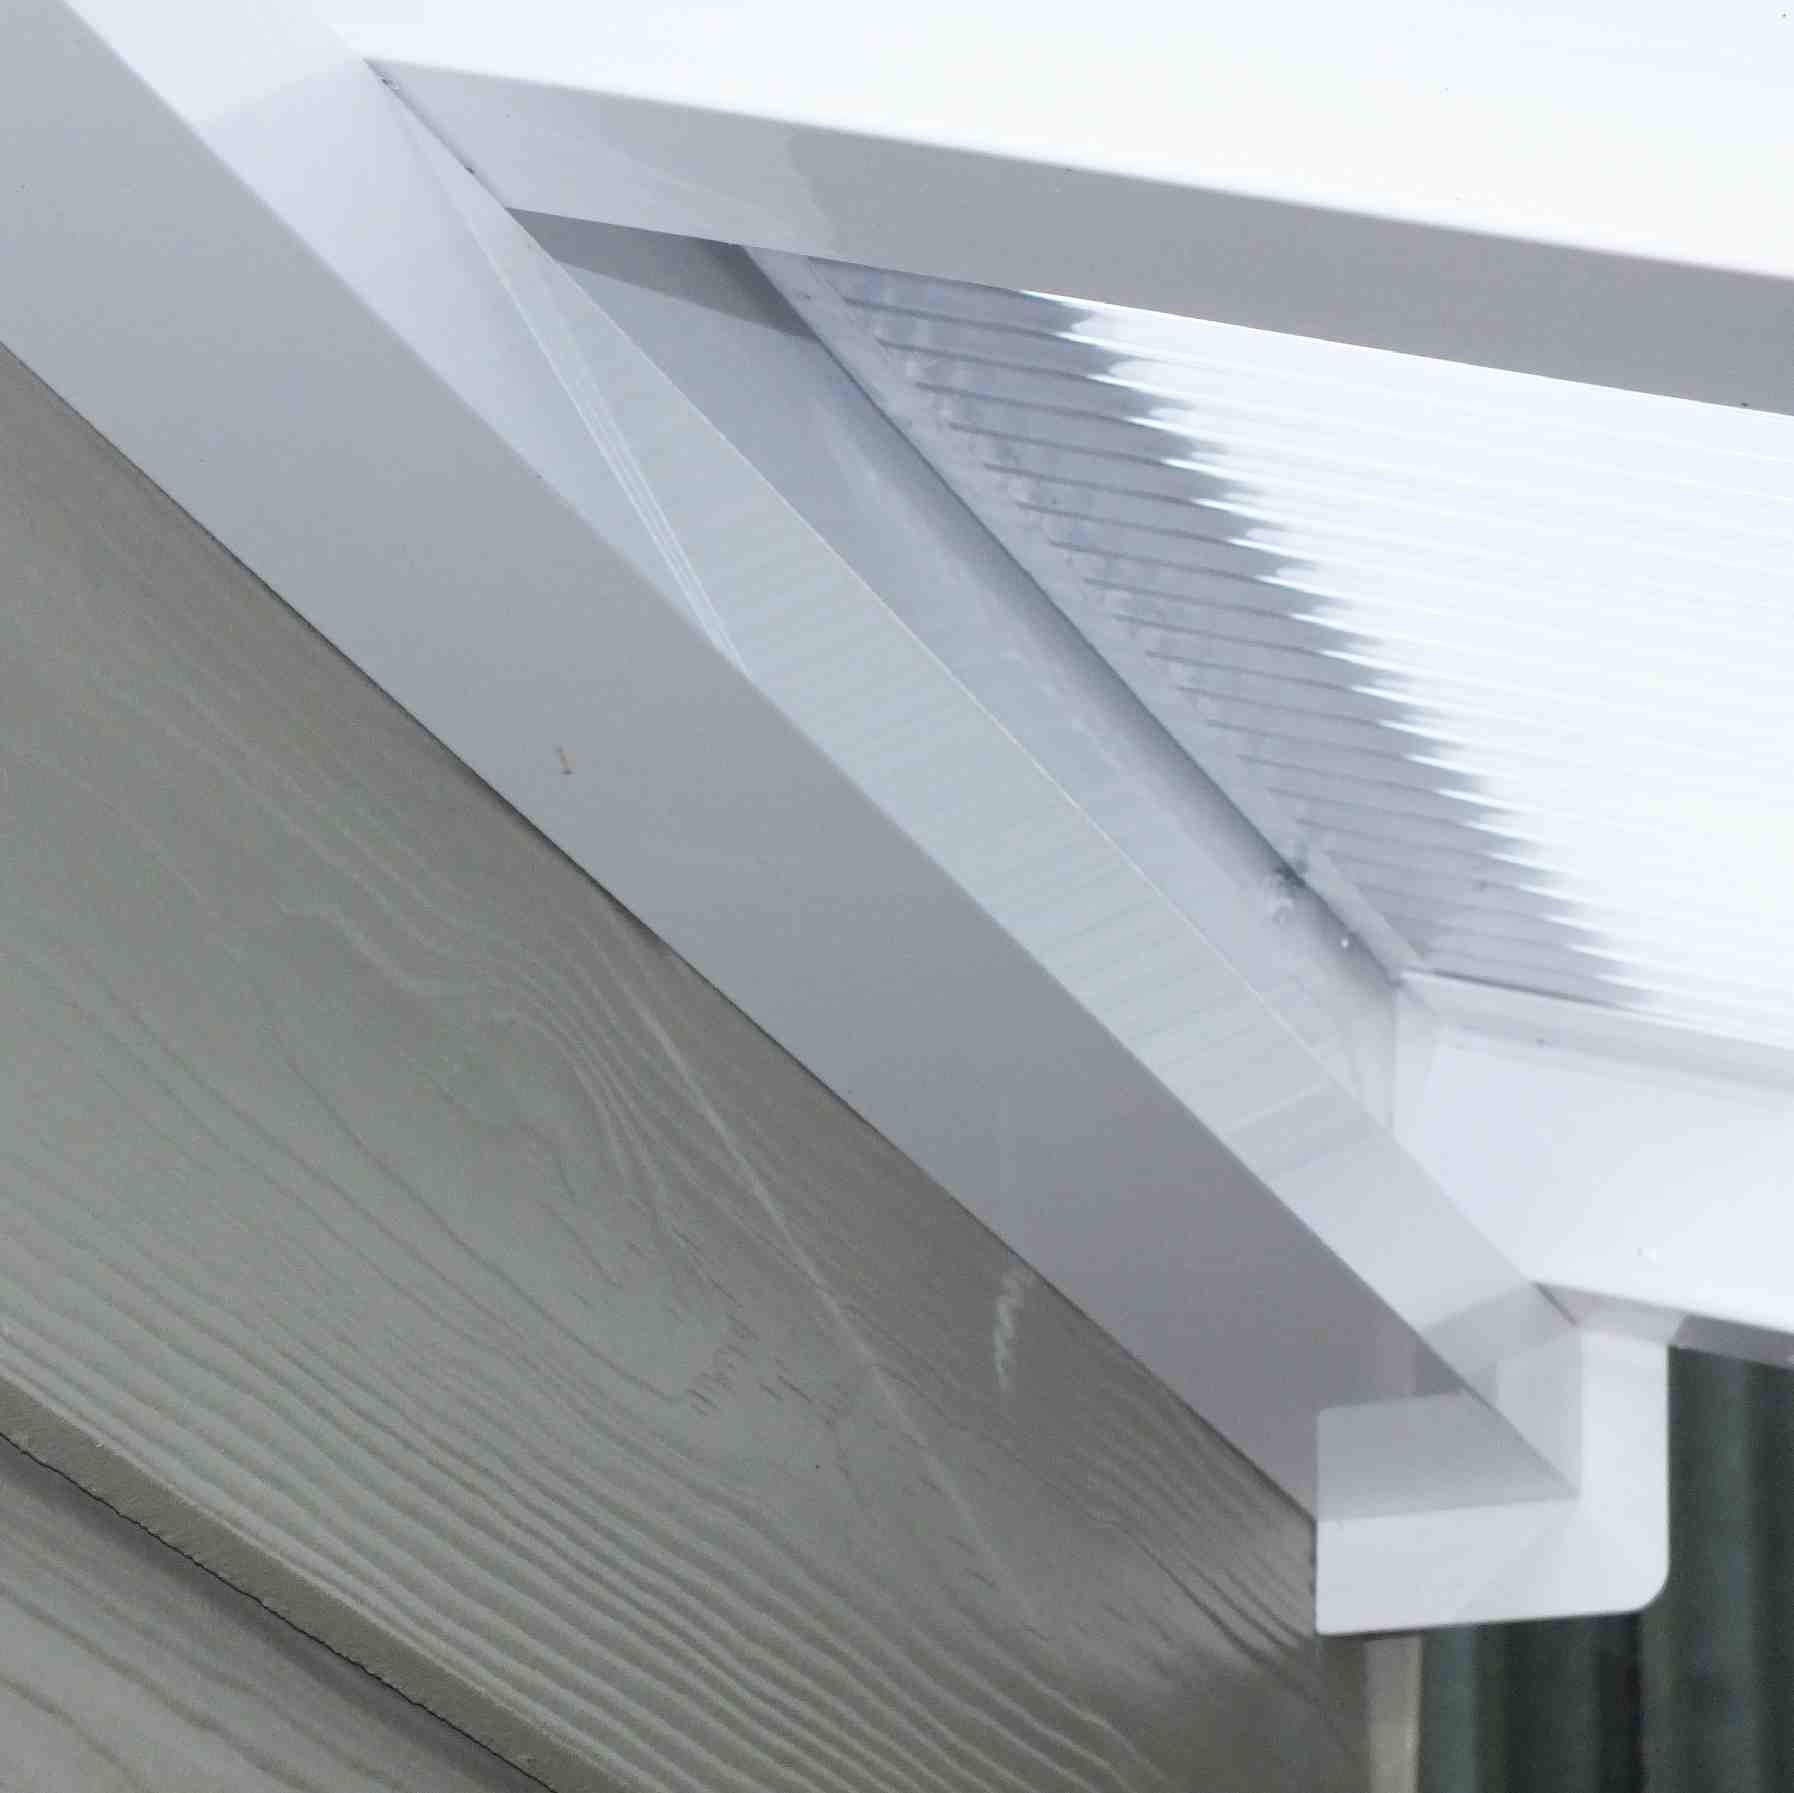 Great deals on Omega Verandah White with 6mm Glass Clear Plate Polycarbonate Glazing - 7.7m (W) x 3.0m (P), (4) Supporting Posts